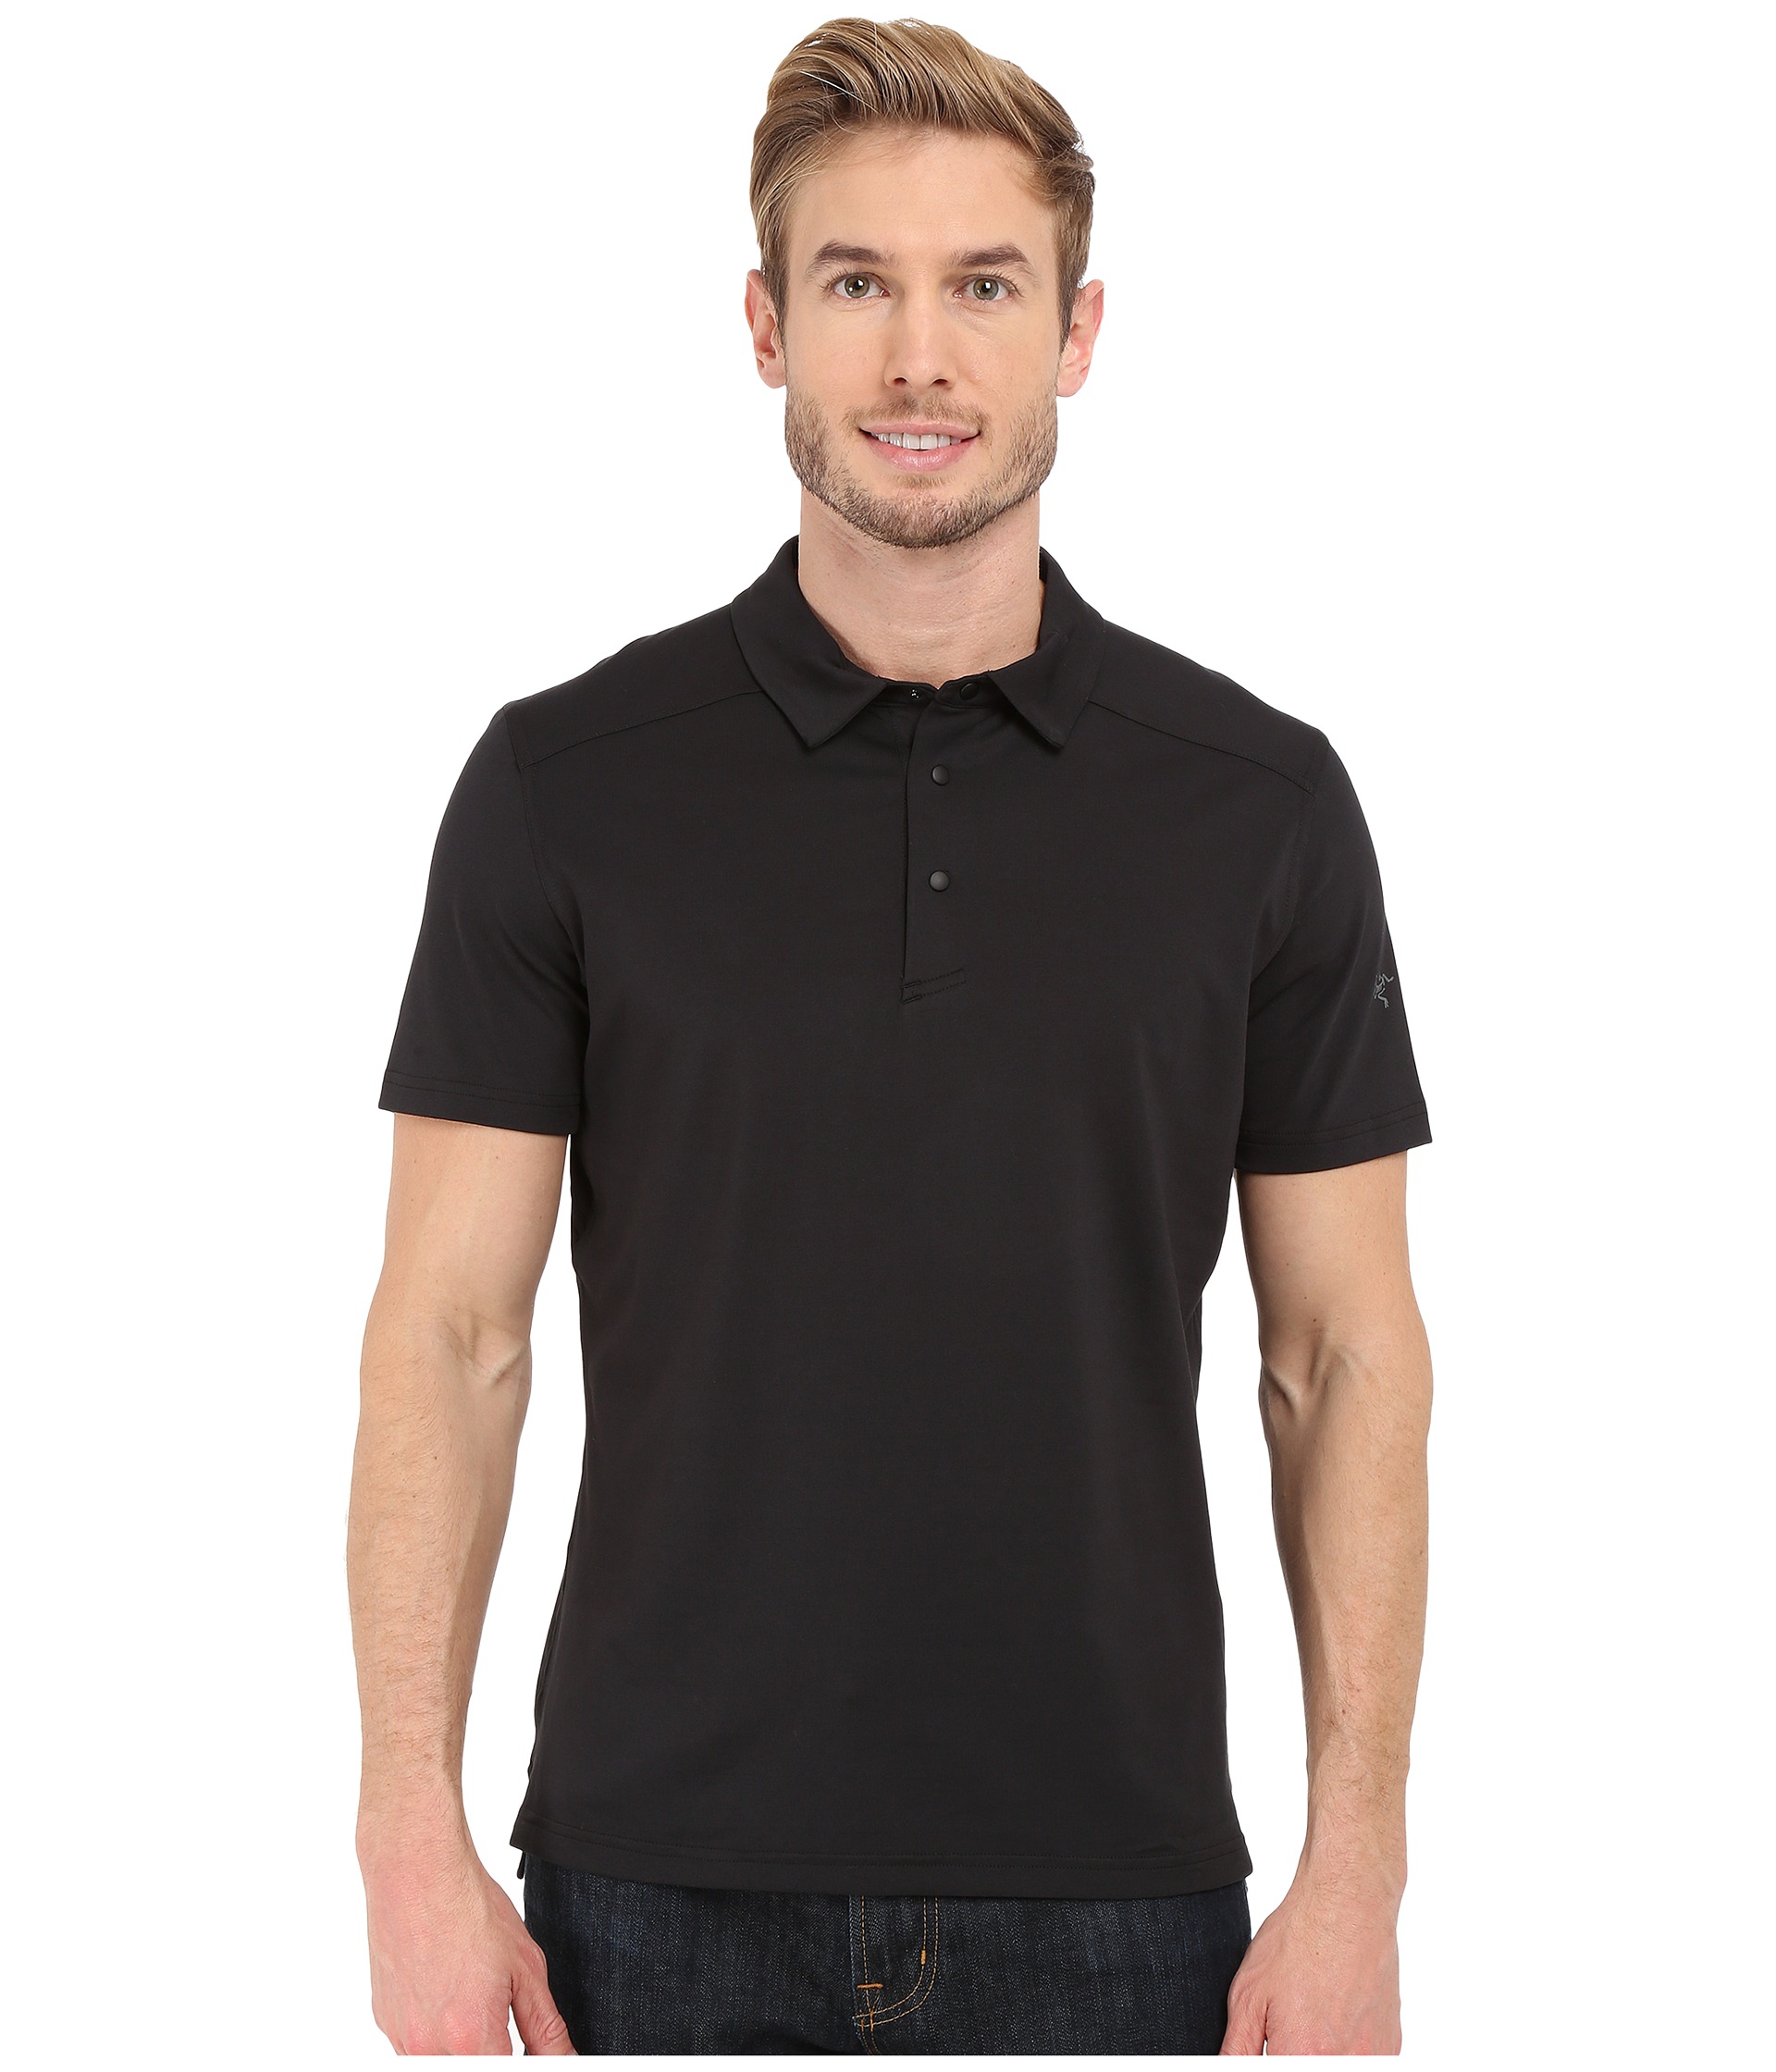 [$137.95] Authentic Archaeopteryx ARCTERYX Chilco SS Polo Leisure Dry ...